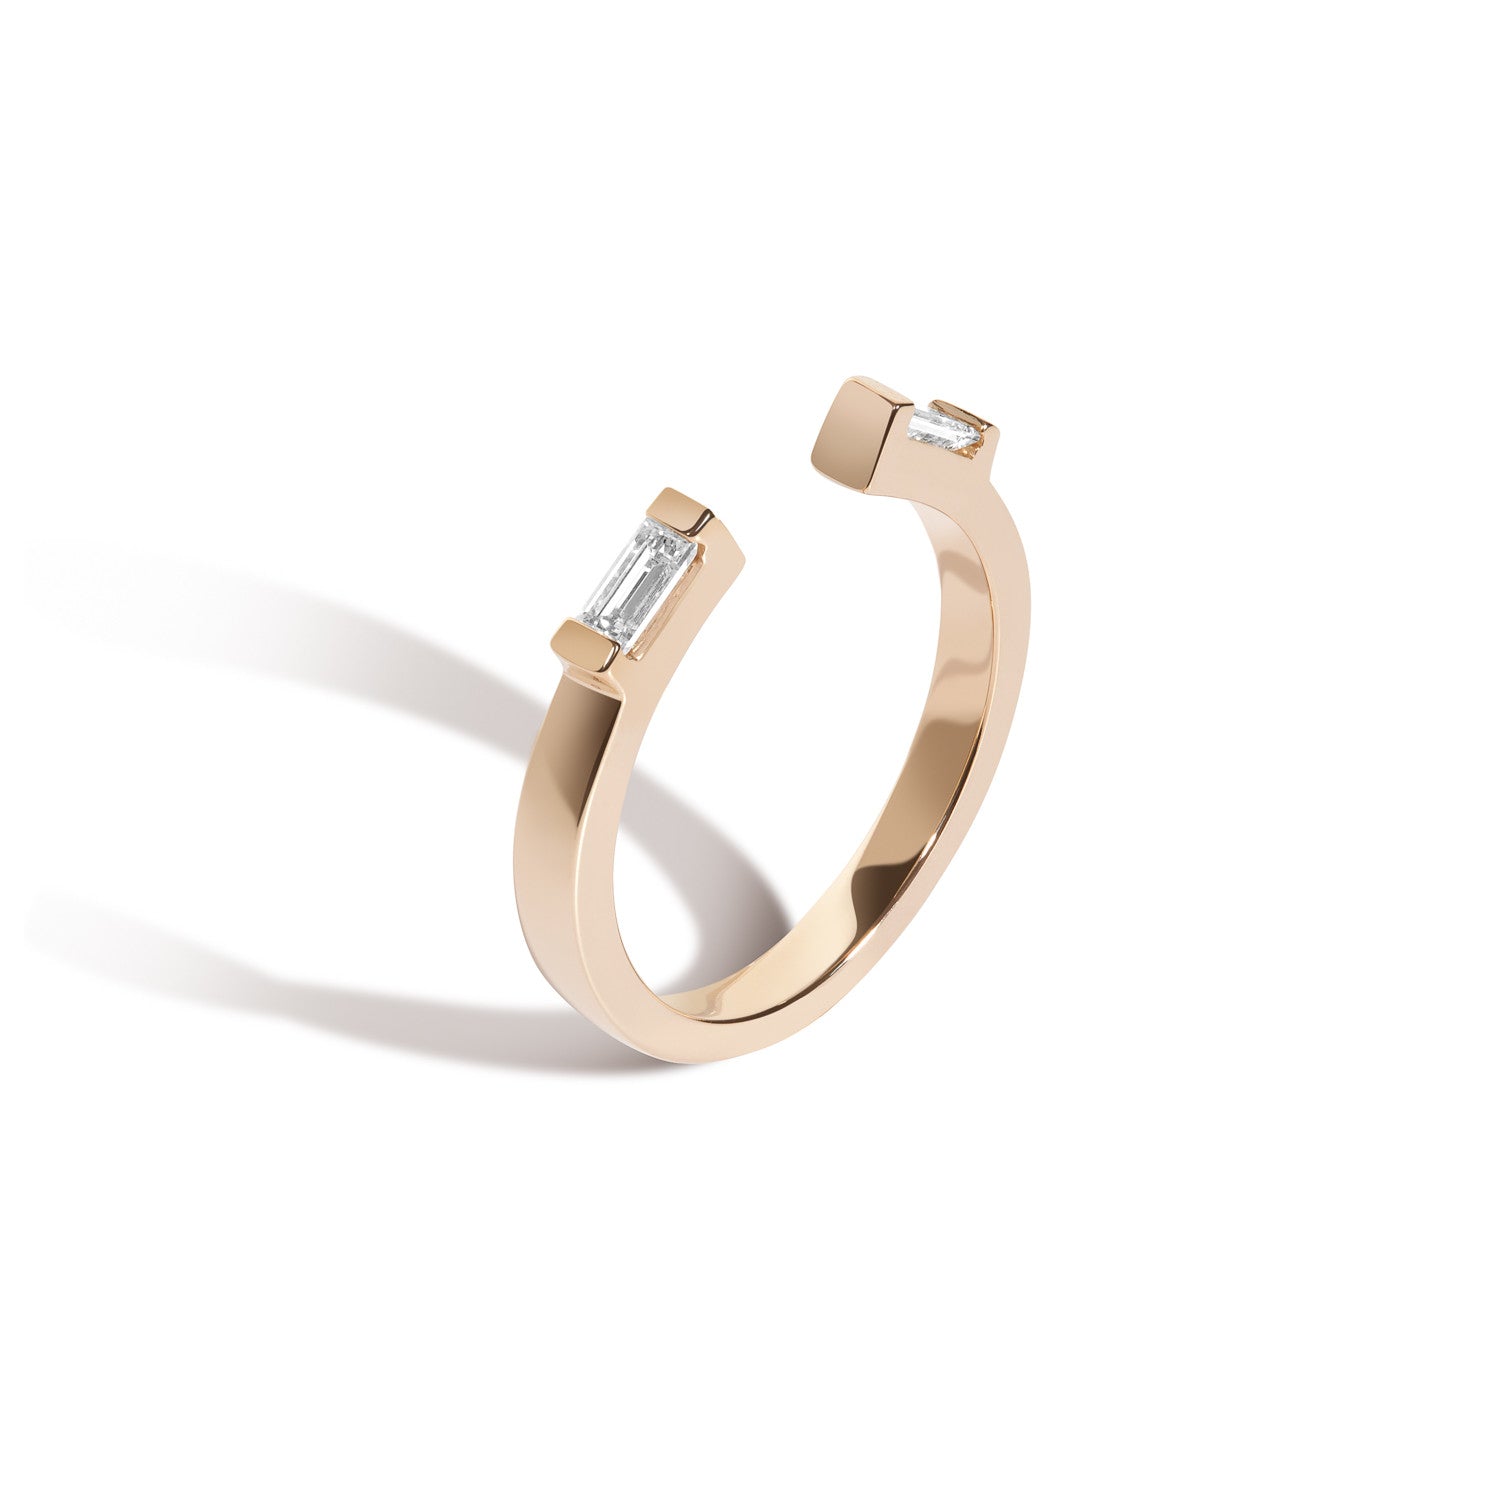 Shahla Karimi Jewelry 14/18K Yellow Gold Rockefeller No.1 Open Ring with Diamond Baguettes - Side View